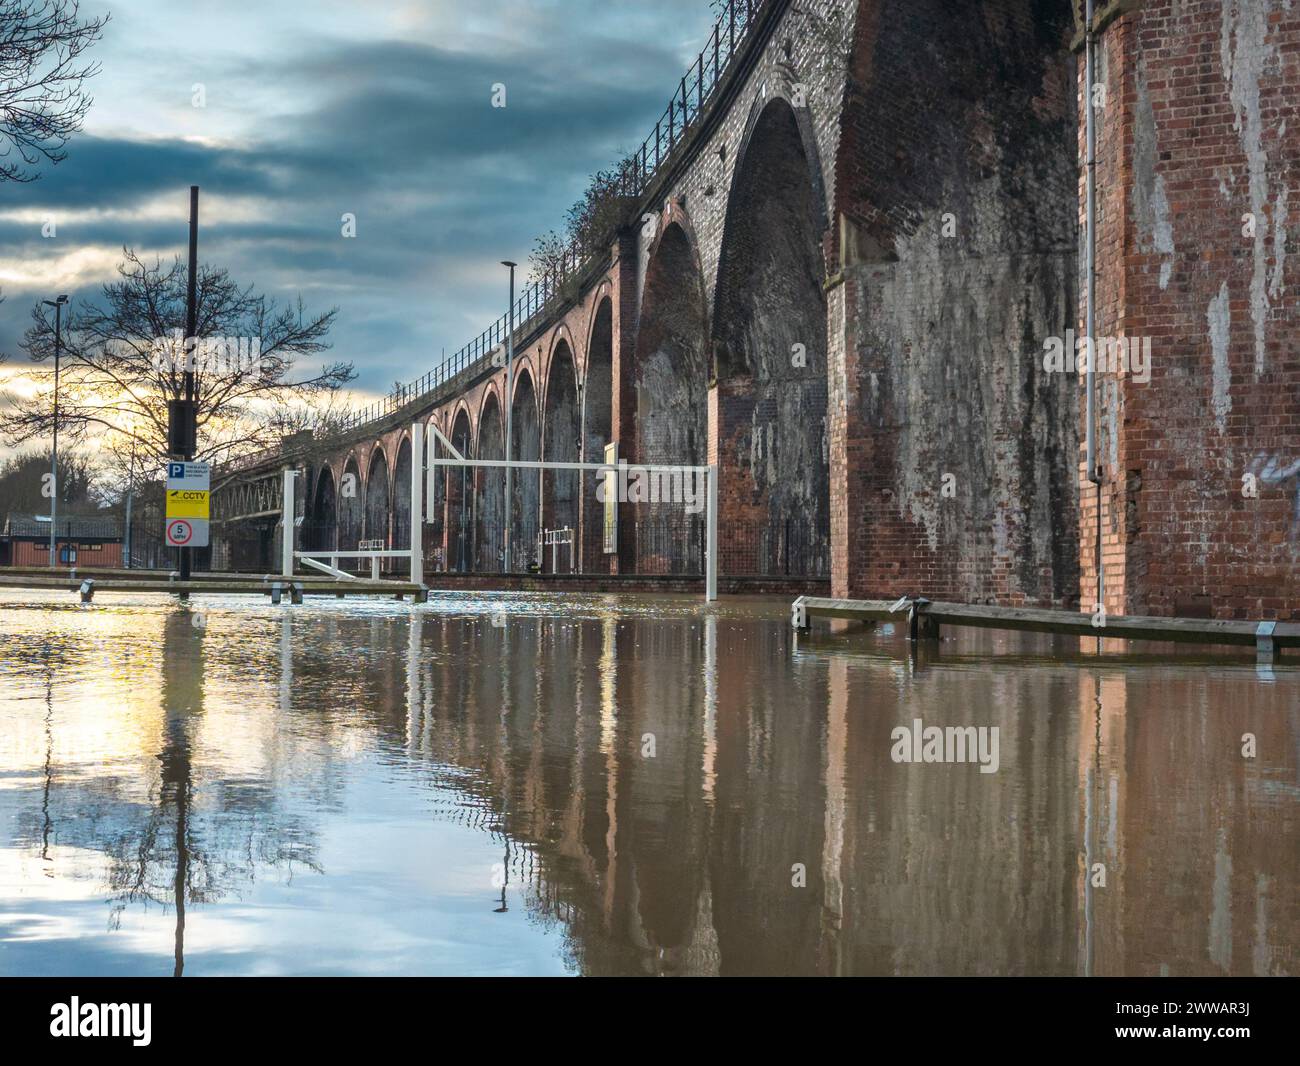 Extreme weather conditions,cause extensive flooding,the Victorian rail viaduct overhead in previously dry areas,roads cut off,flooded fields and highw Stock Photo